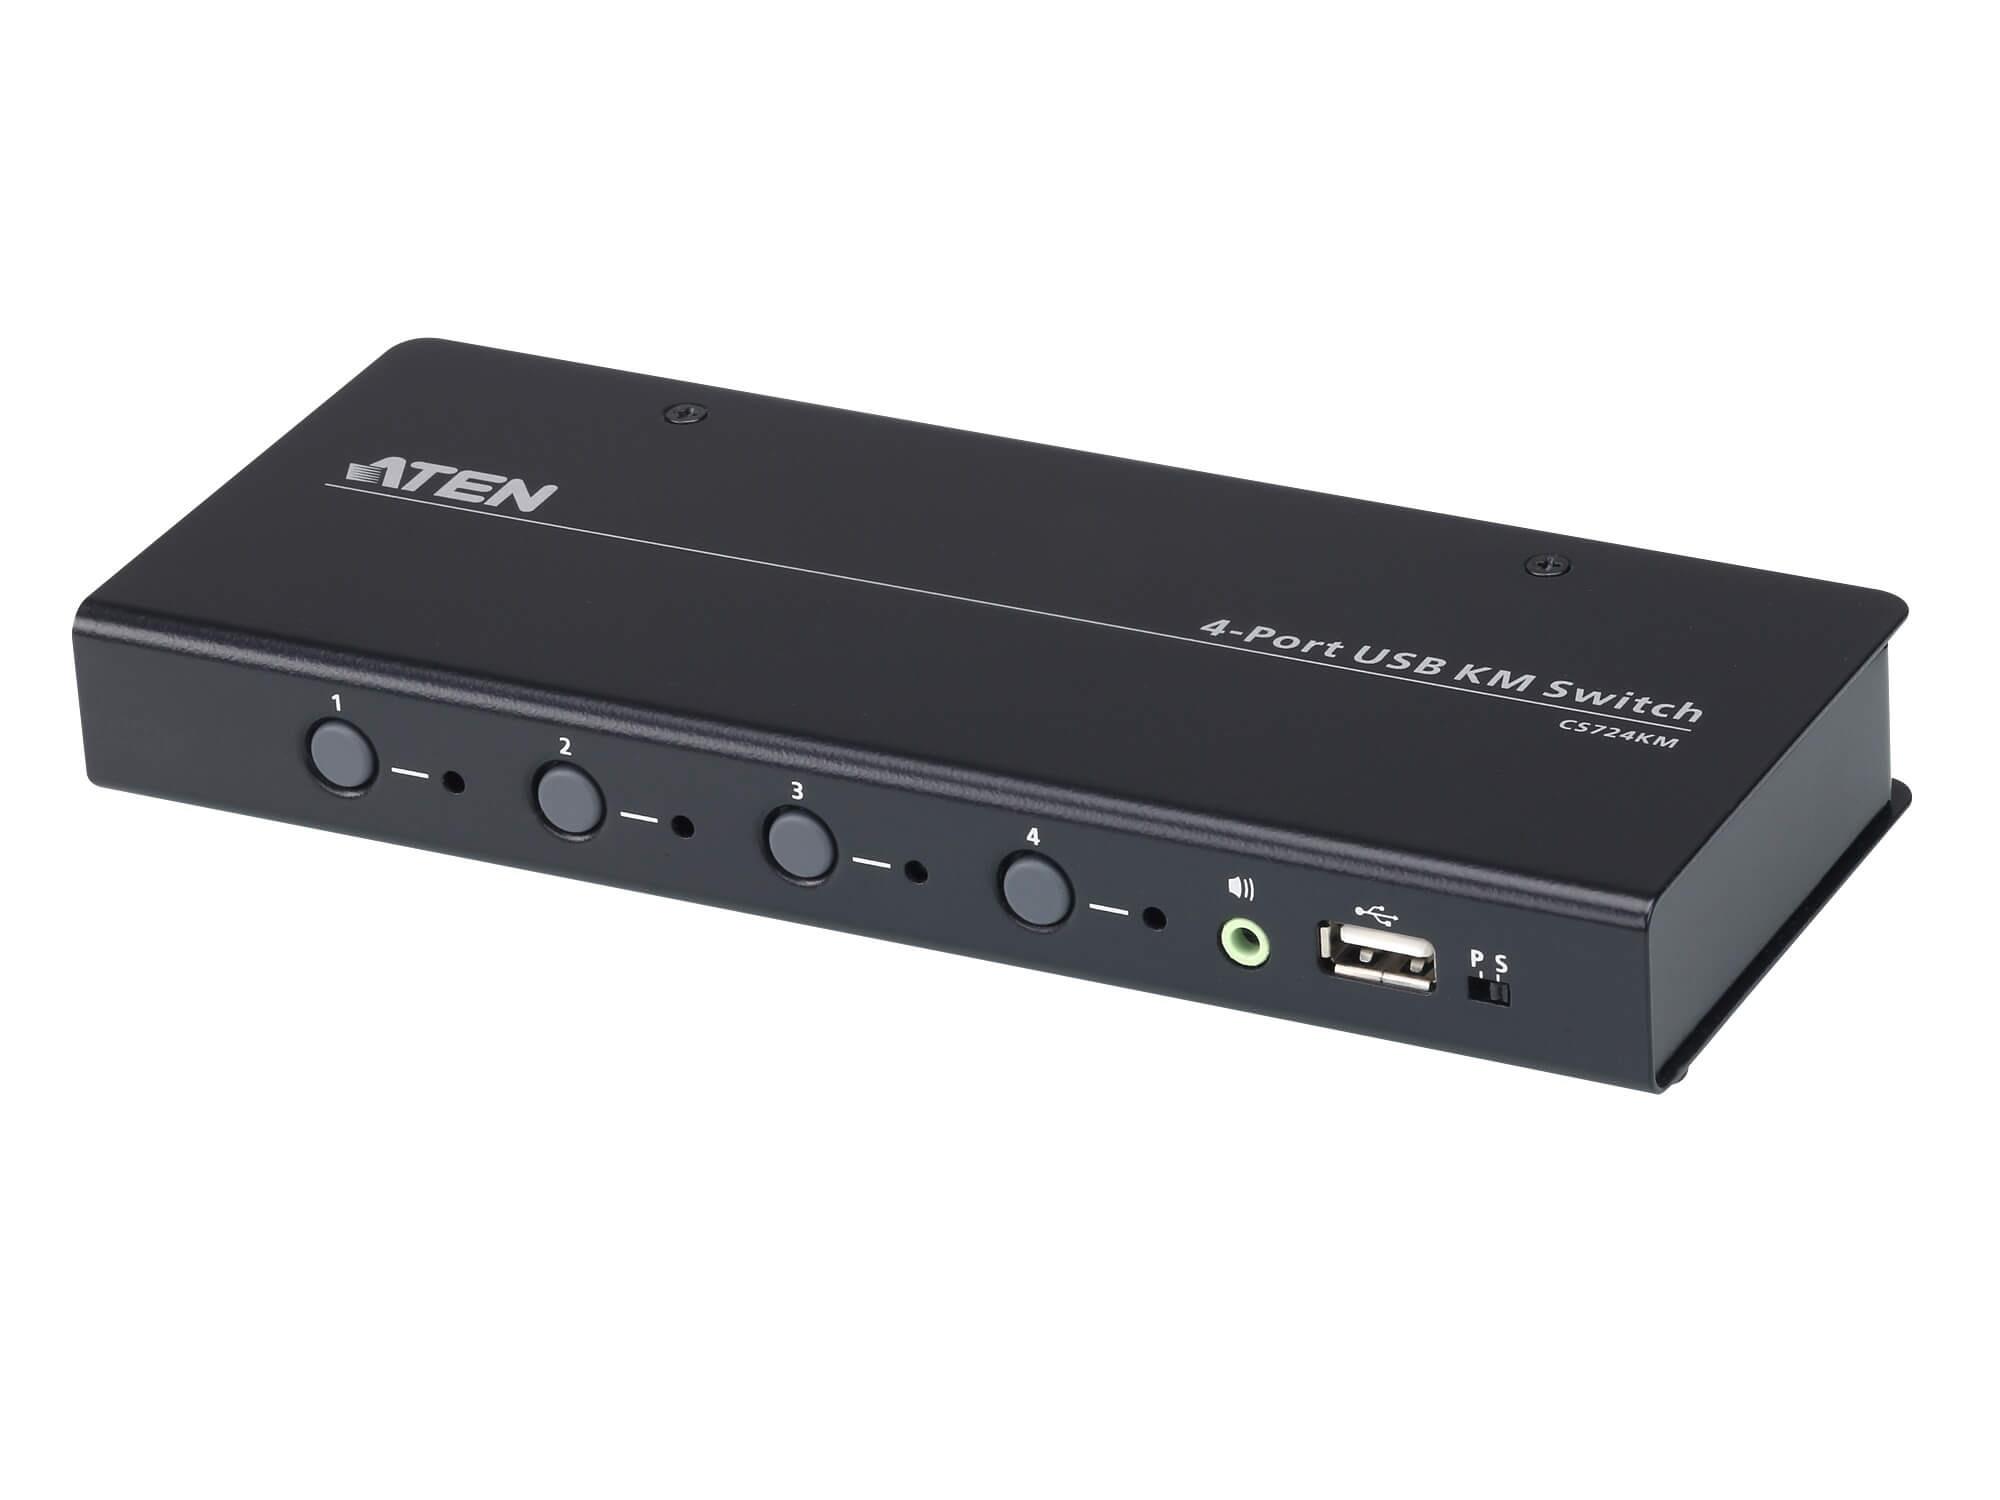 CS724KM 4-port USB Boundless KVM Switch (Cables included) by Aten